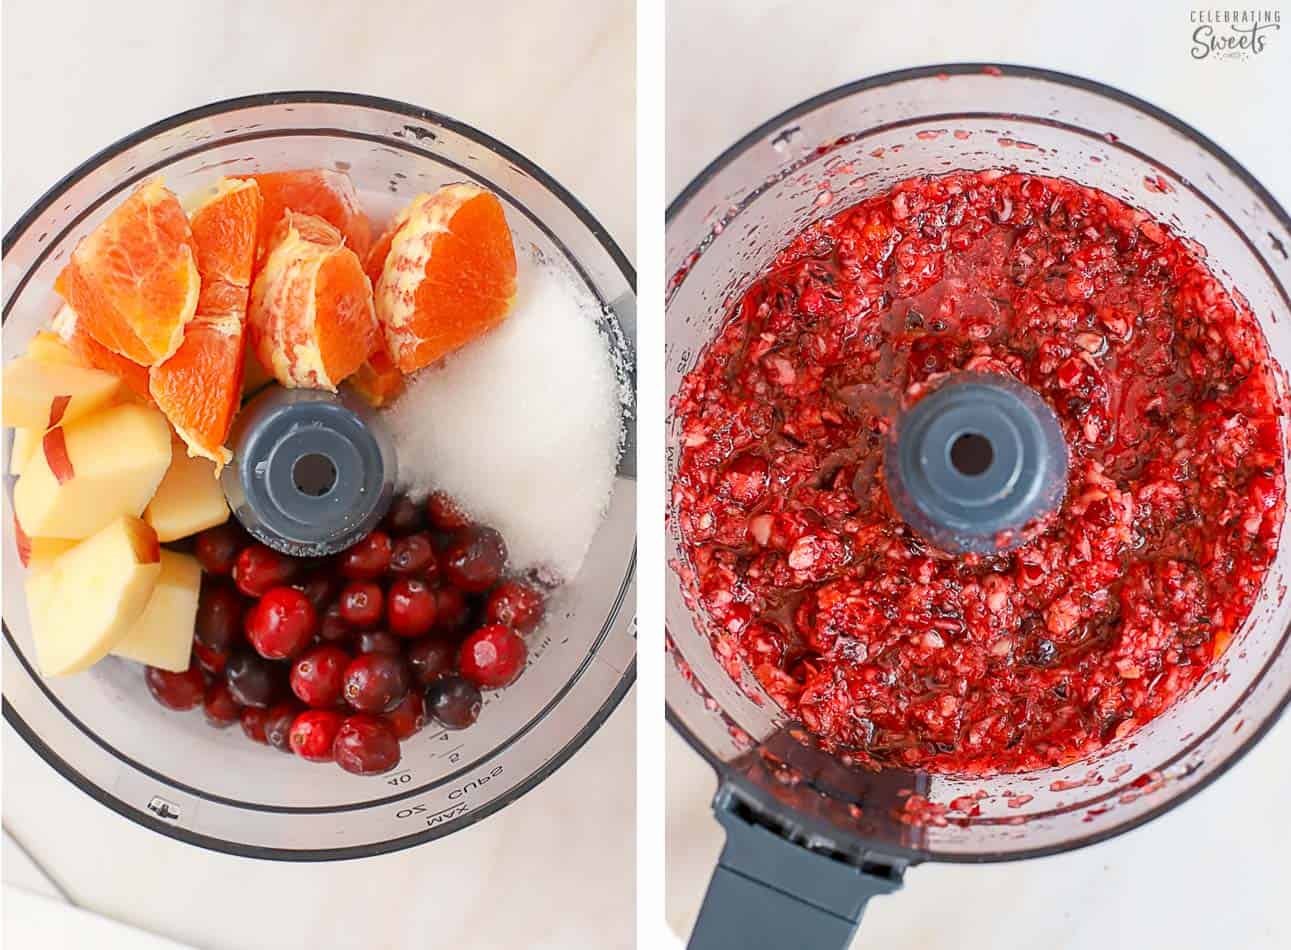 Oranges, apples, cranberries, and sugar in a food processor.